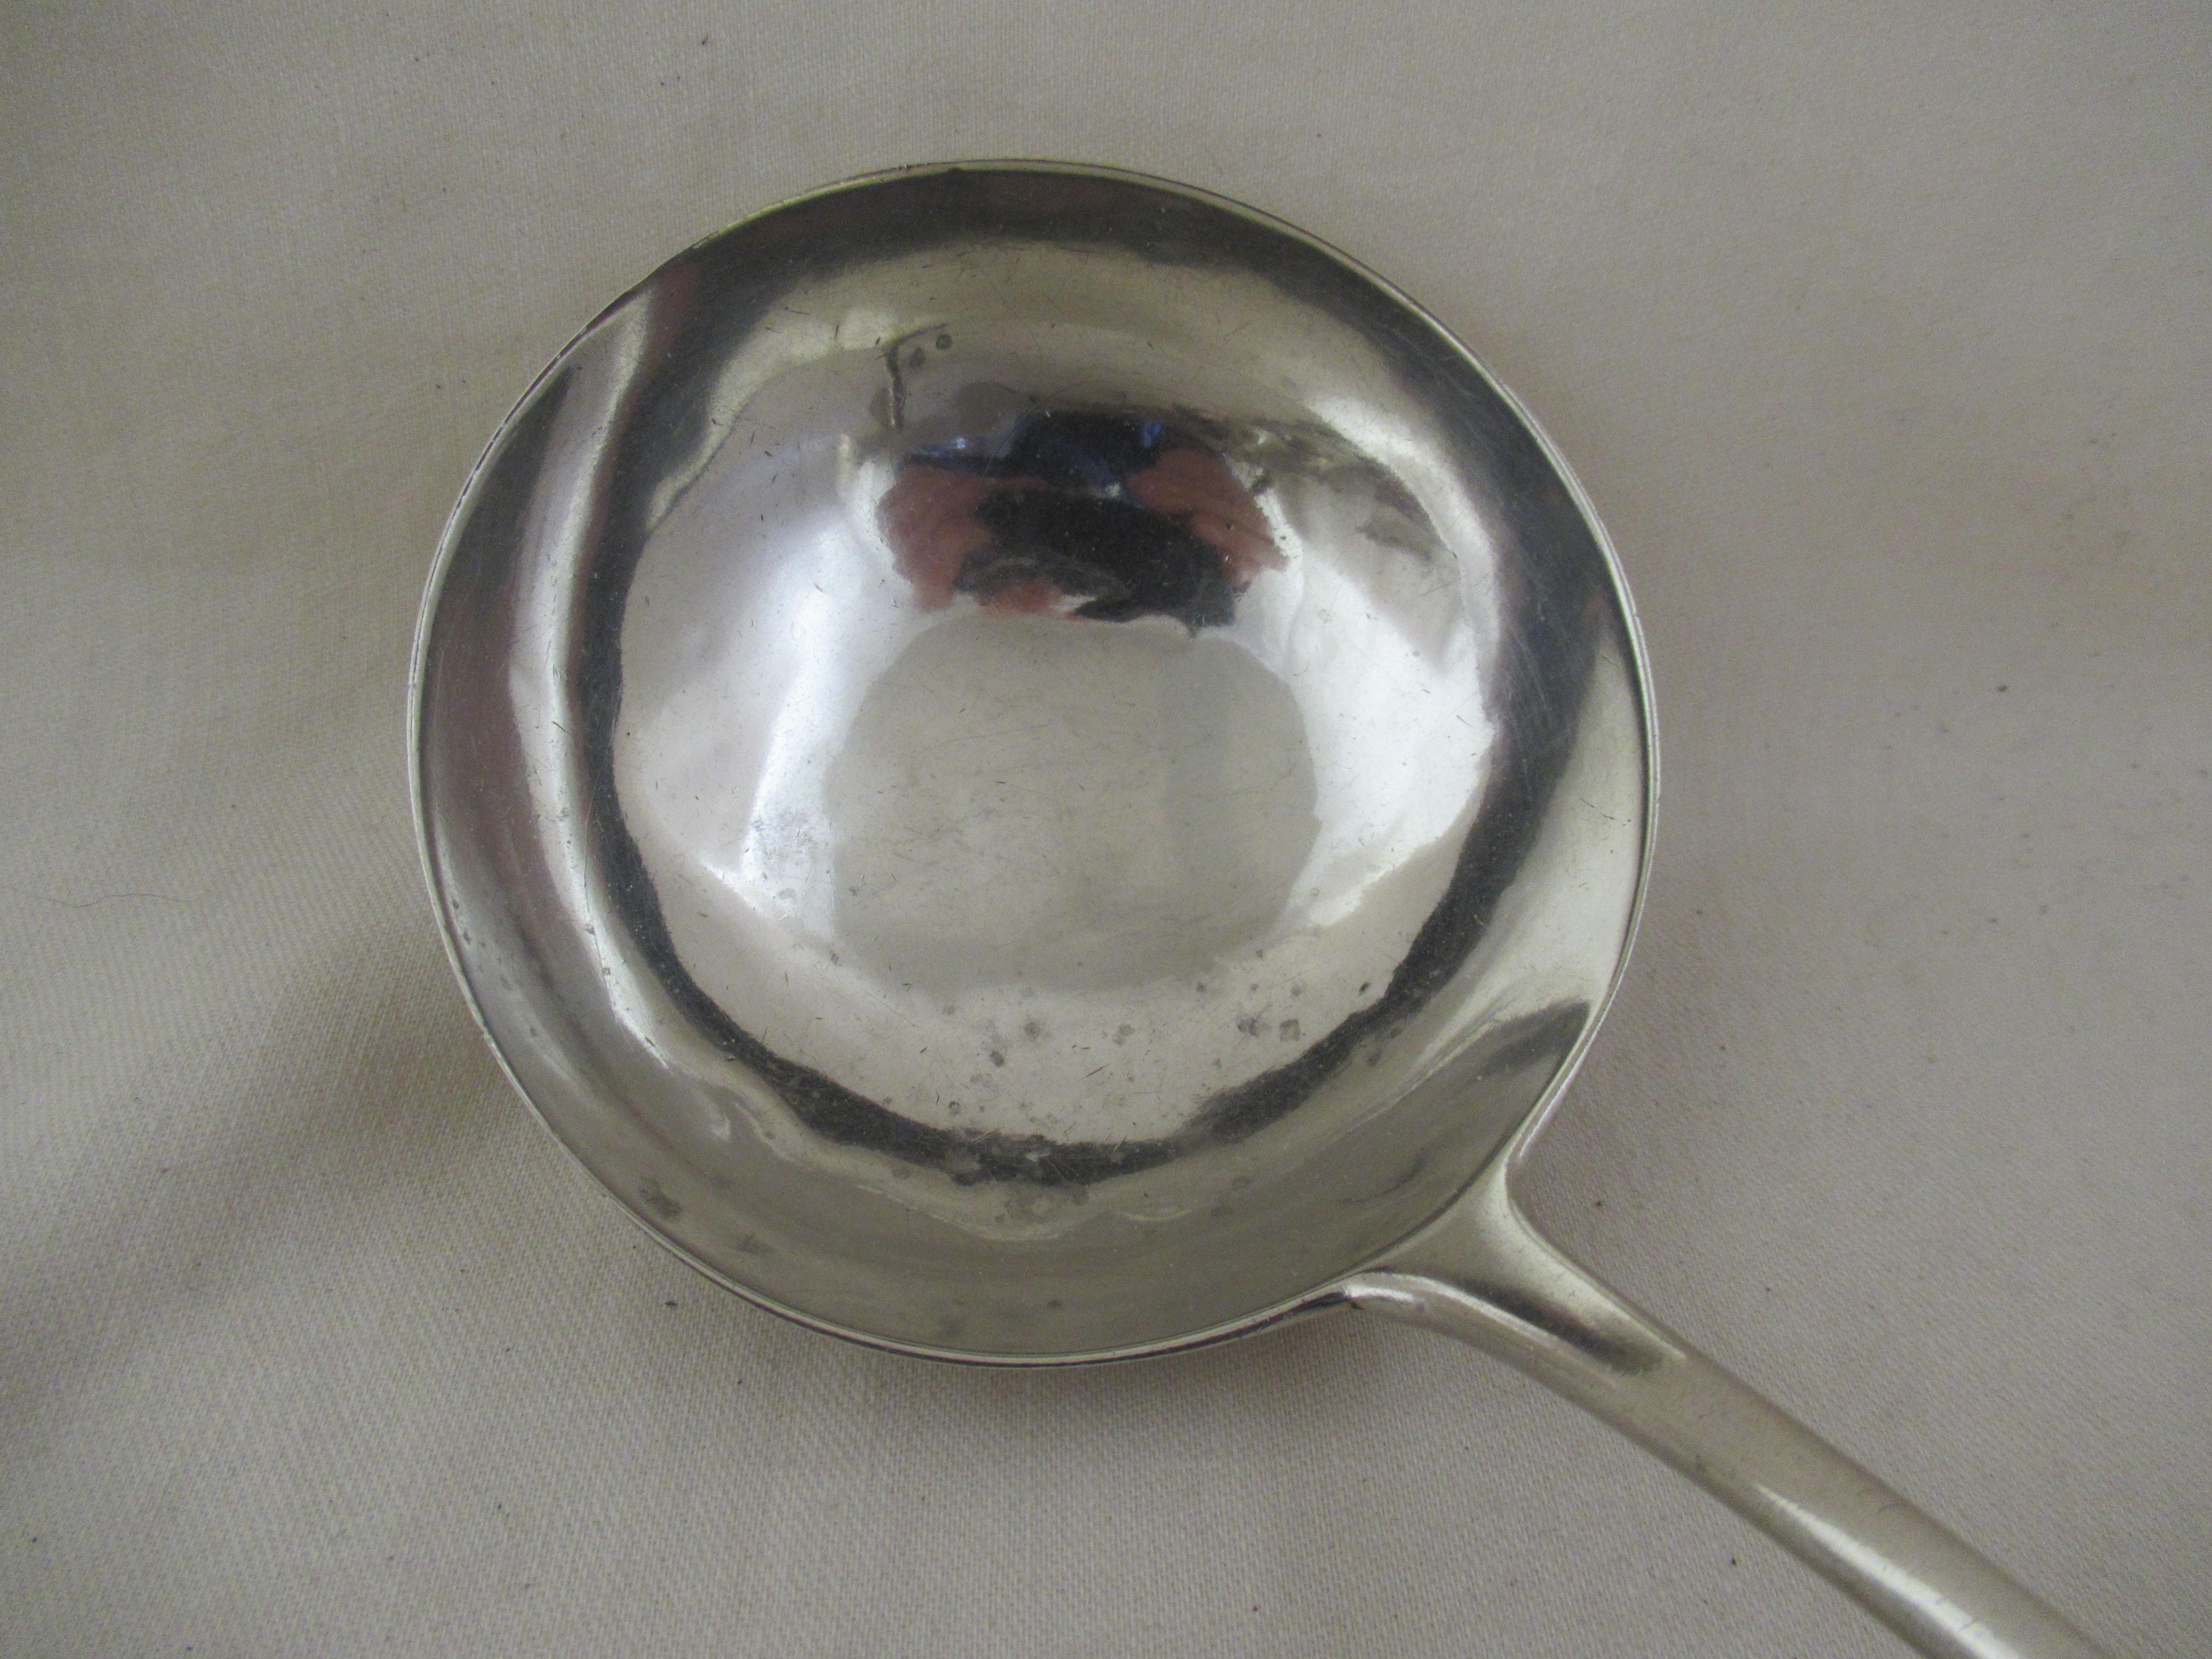 English Sterling Silver - LARGE PUNCH or SOUP LADLE - Dated:-LONDON 1785
A highly desirable ladle in the traditional - OLD ENGLISH PATTERN.

Hallmarks:-   Lower case k - date letter for London 1785
                     Lion:- sterling silver